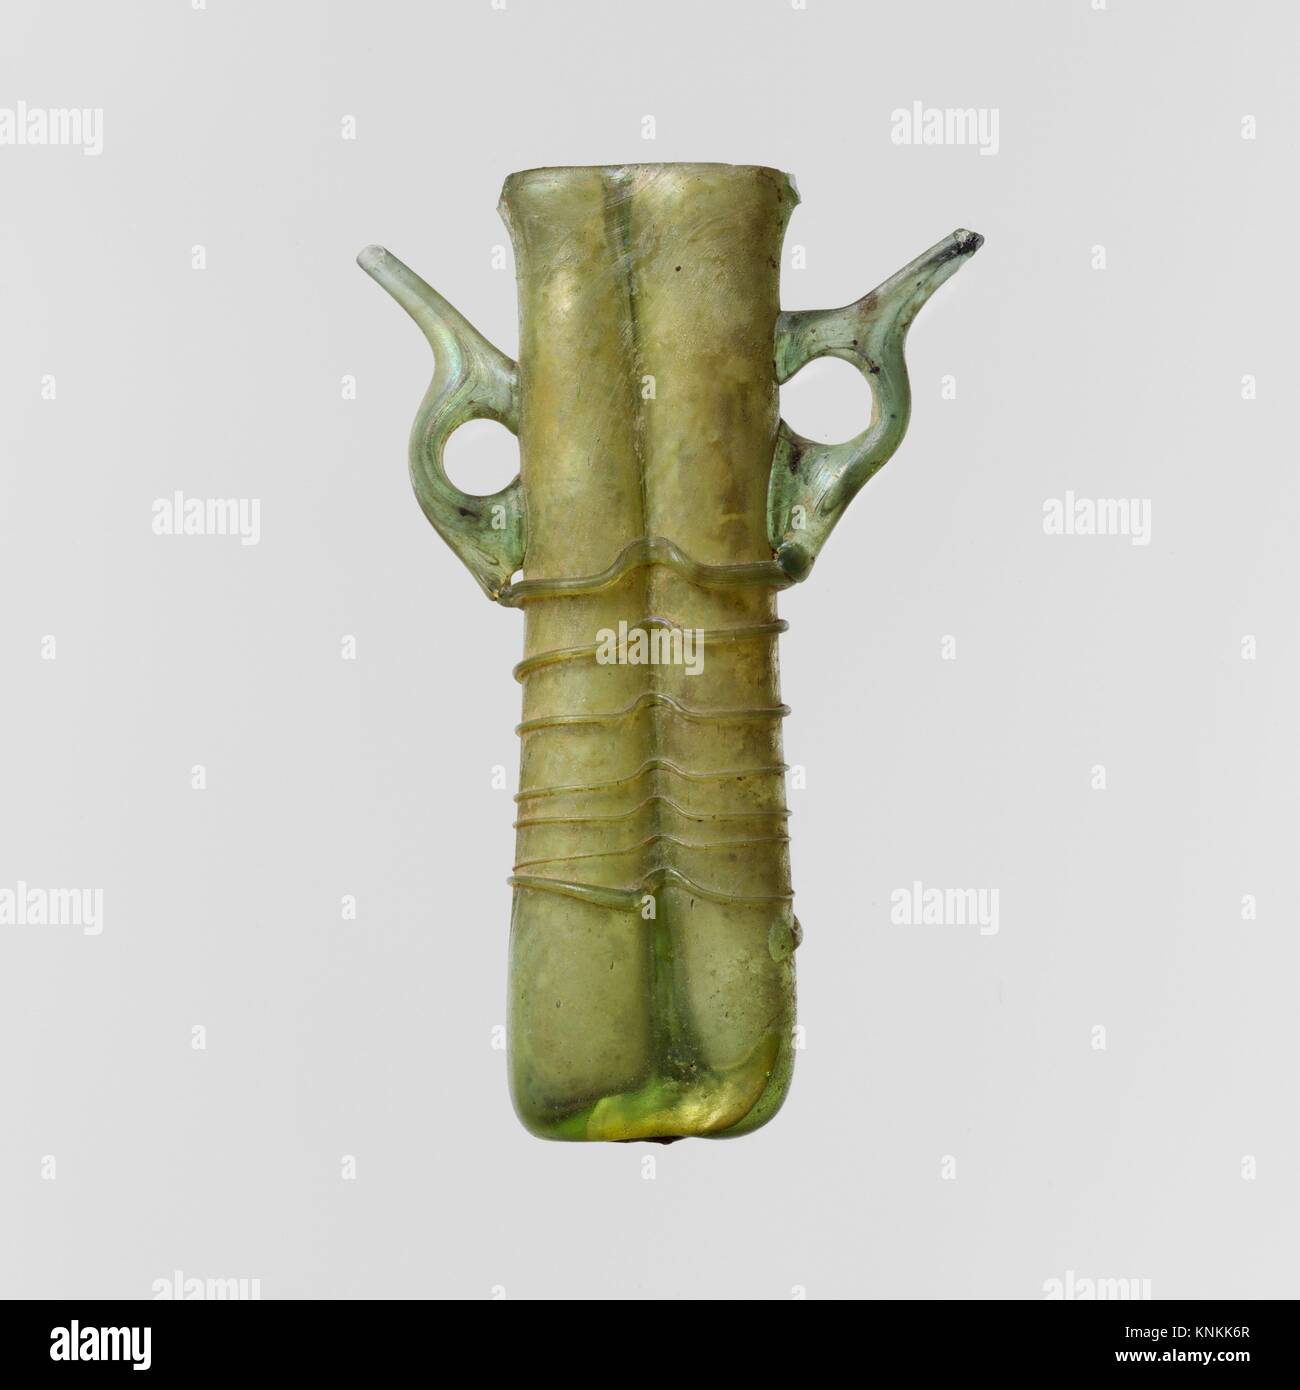 Glass Double Cosmetic Flask Kohl Tube Period Late Imperial Date 4th Century A D Culture